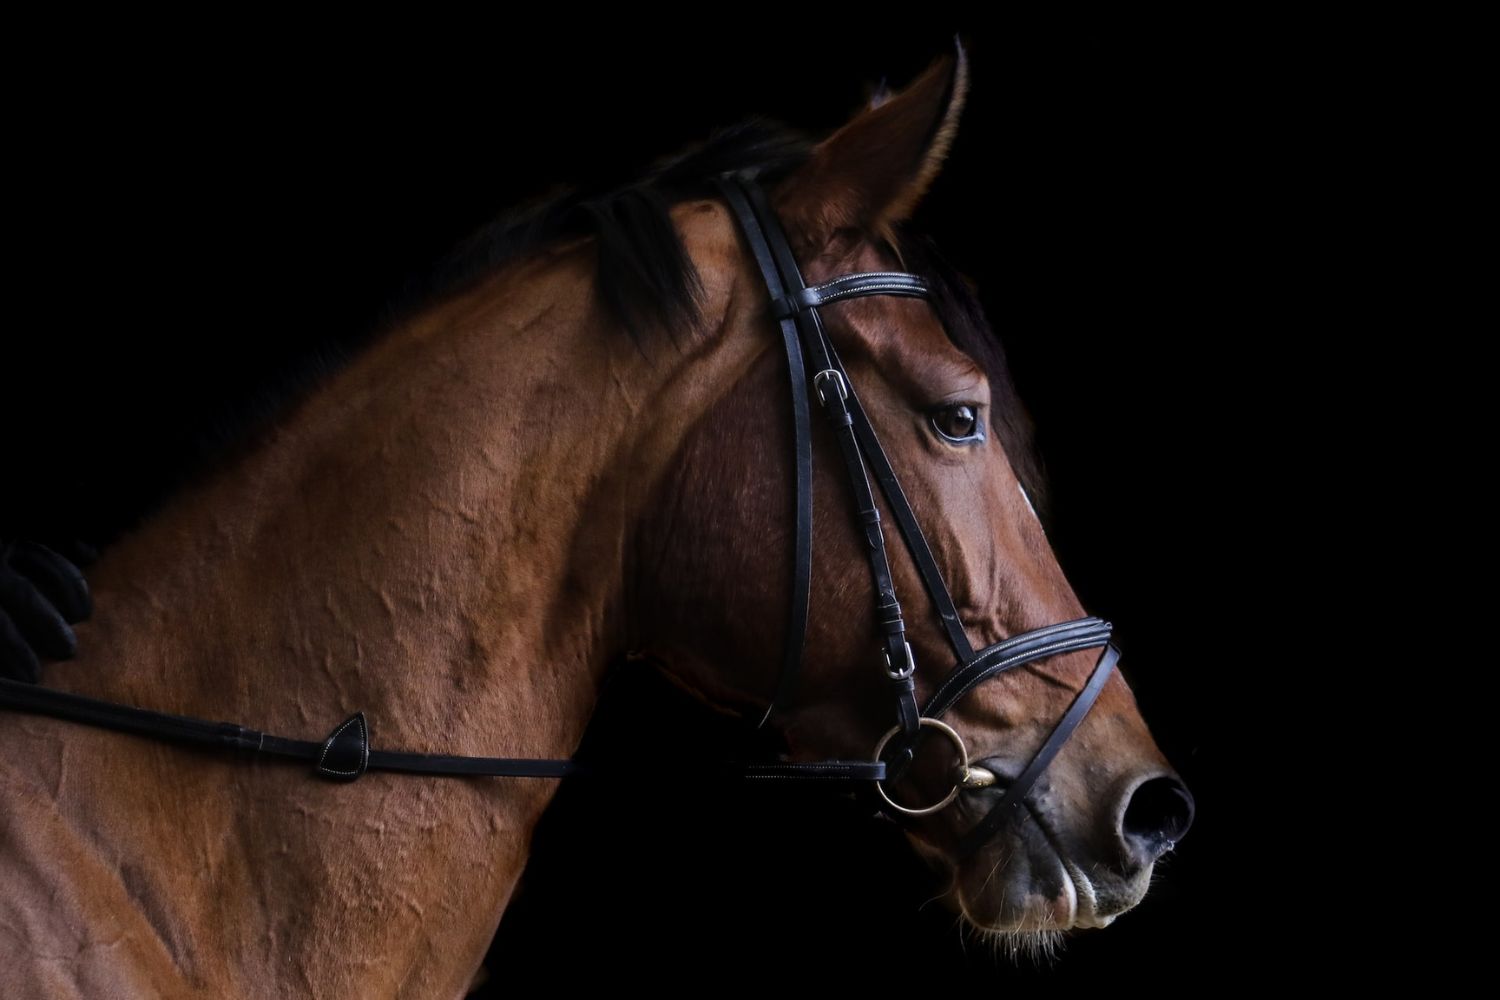 half-body horse Photo by Marylou Fortier on Unsplash